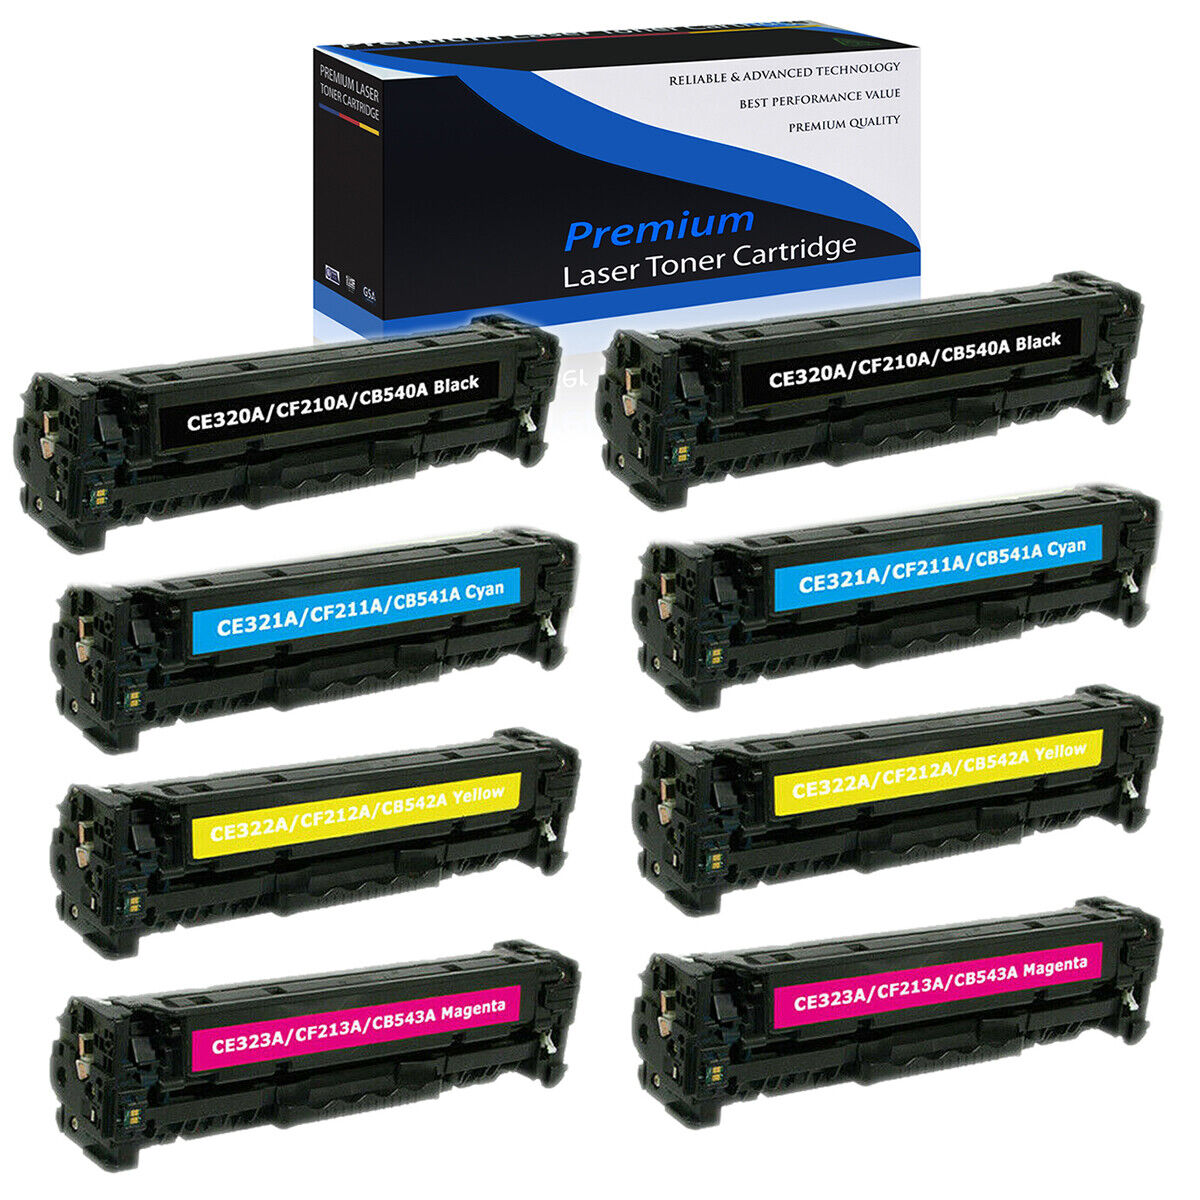 8PK BK/C/Y/M CE320A-CE323A 128A Toner For HP LaserJet Pro CM1415FNW CP1525NW